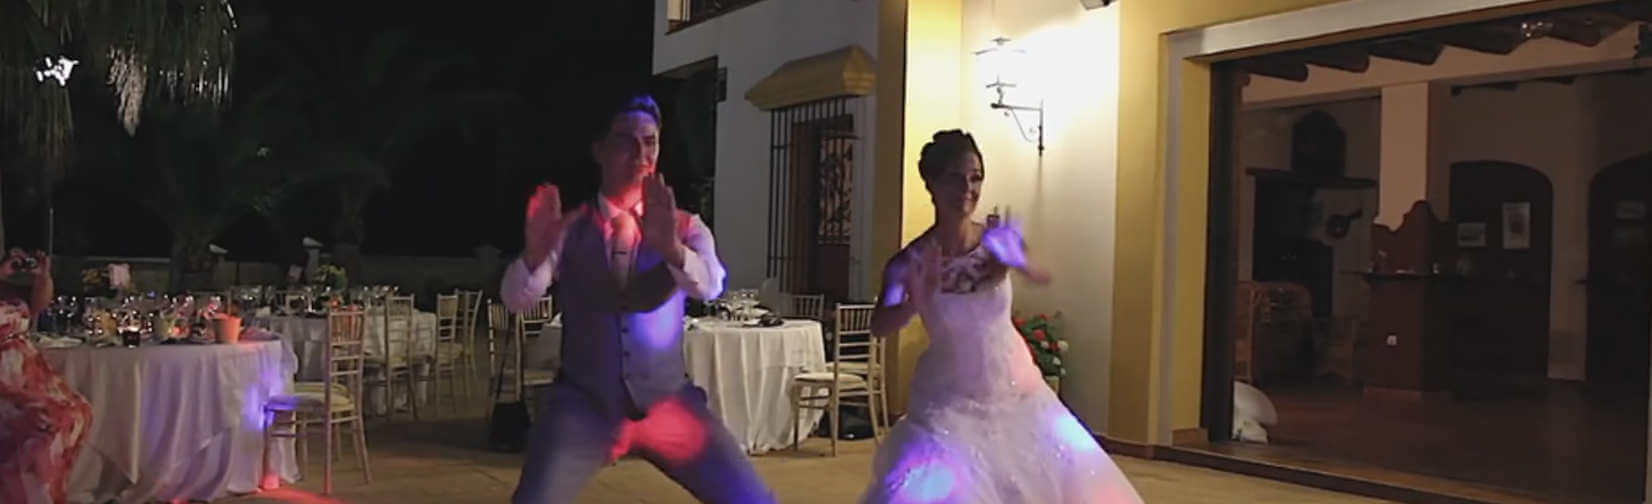 If you've ever dreamed of performing a choreographed dance at your wedding . . .